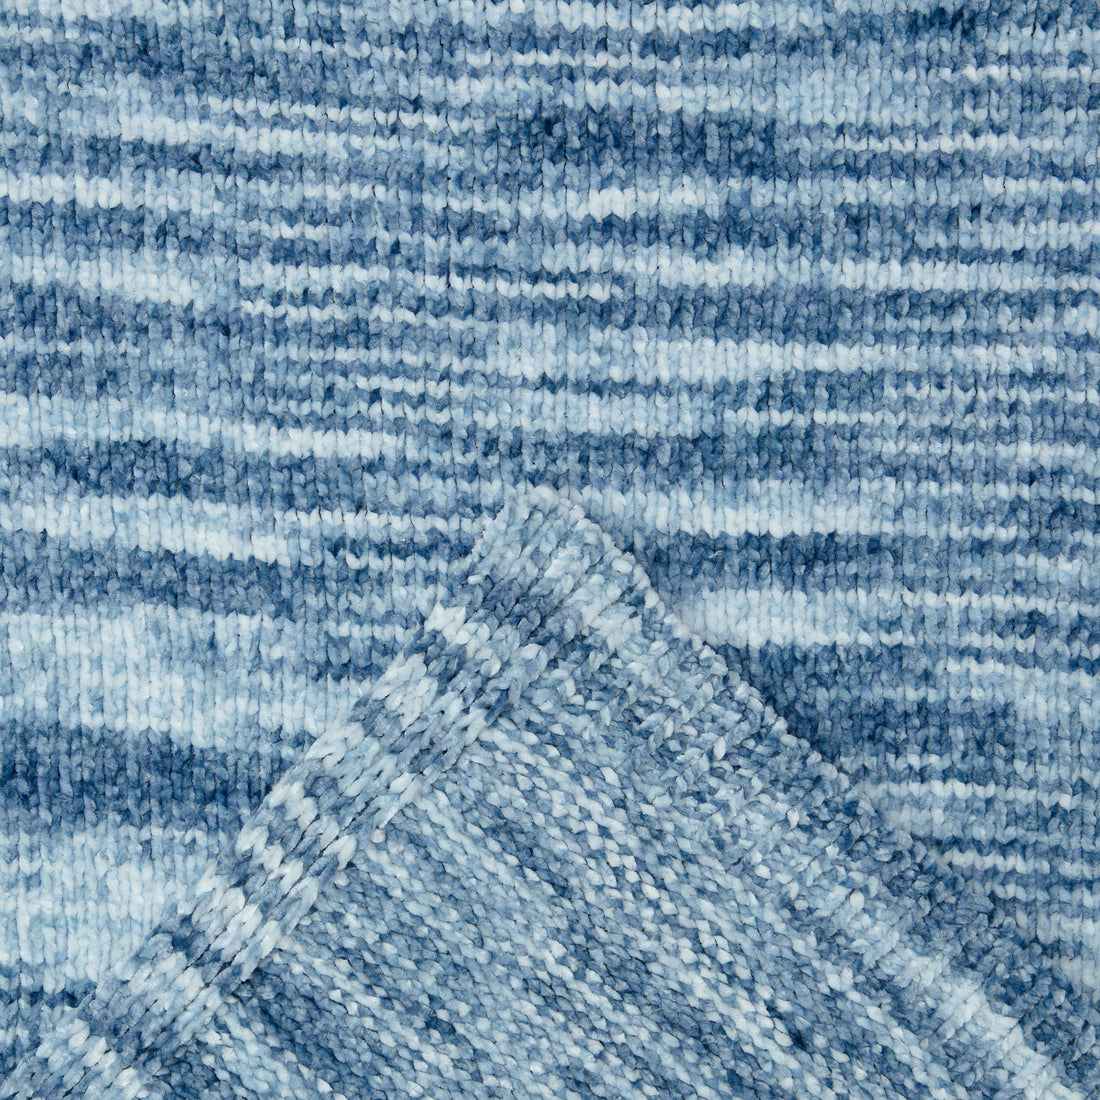 Blue Ombre Chenille Throw Blanket